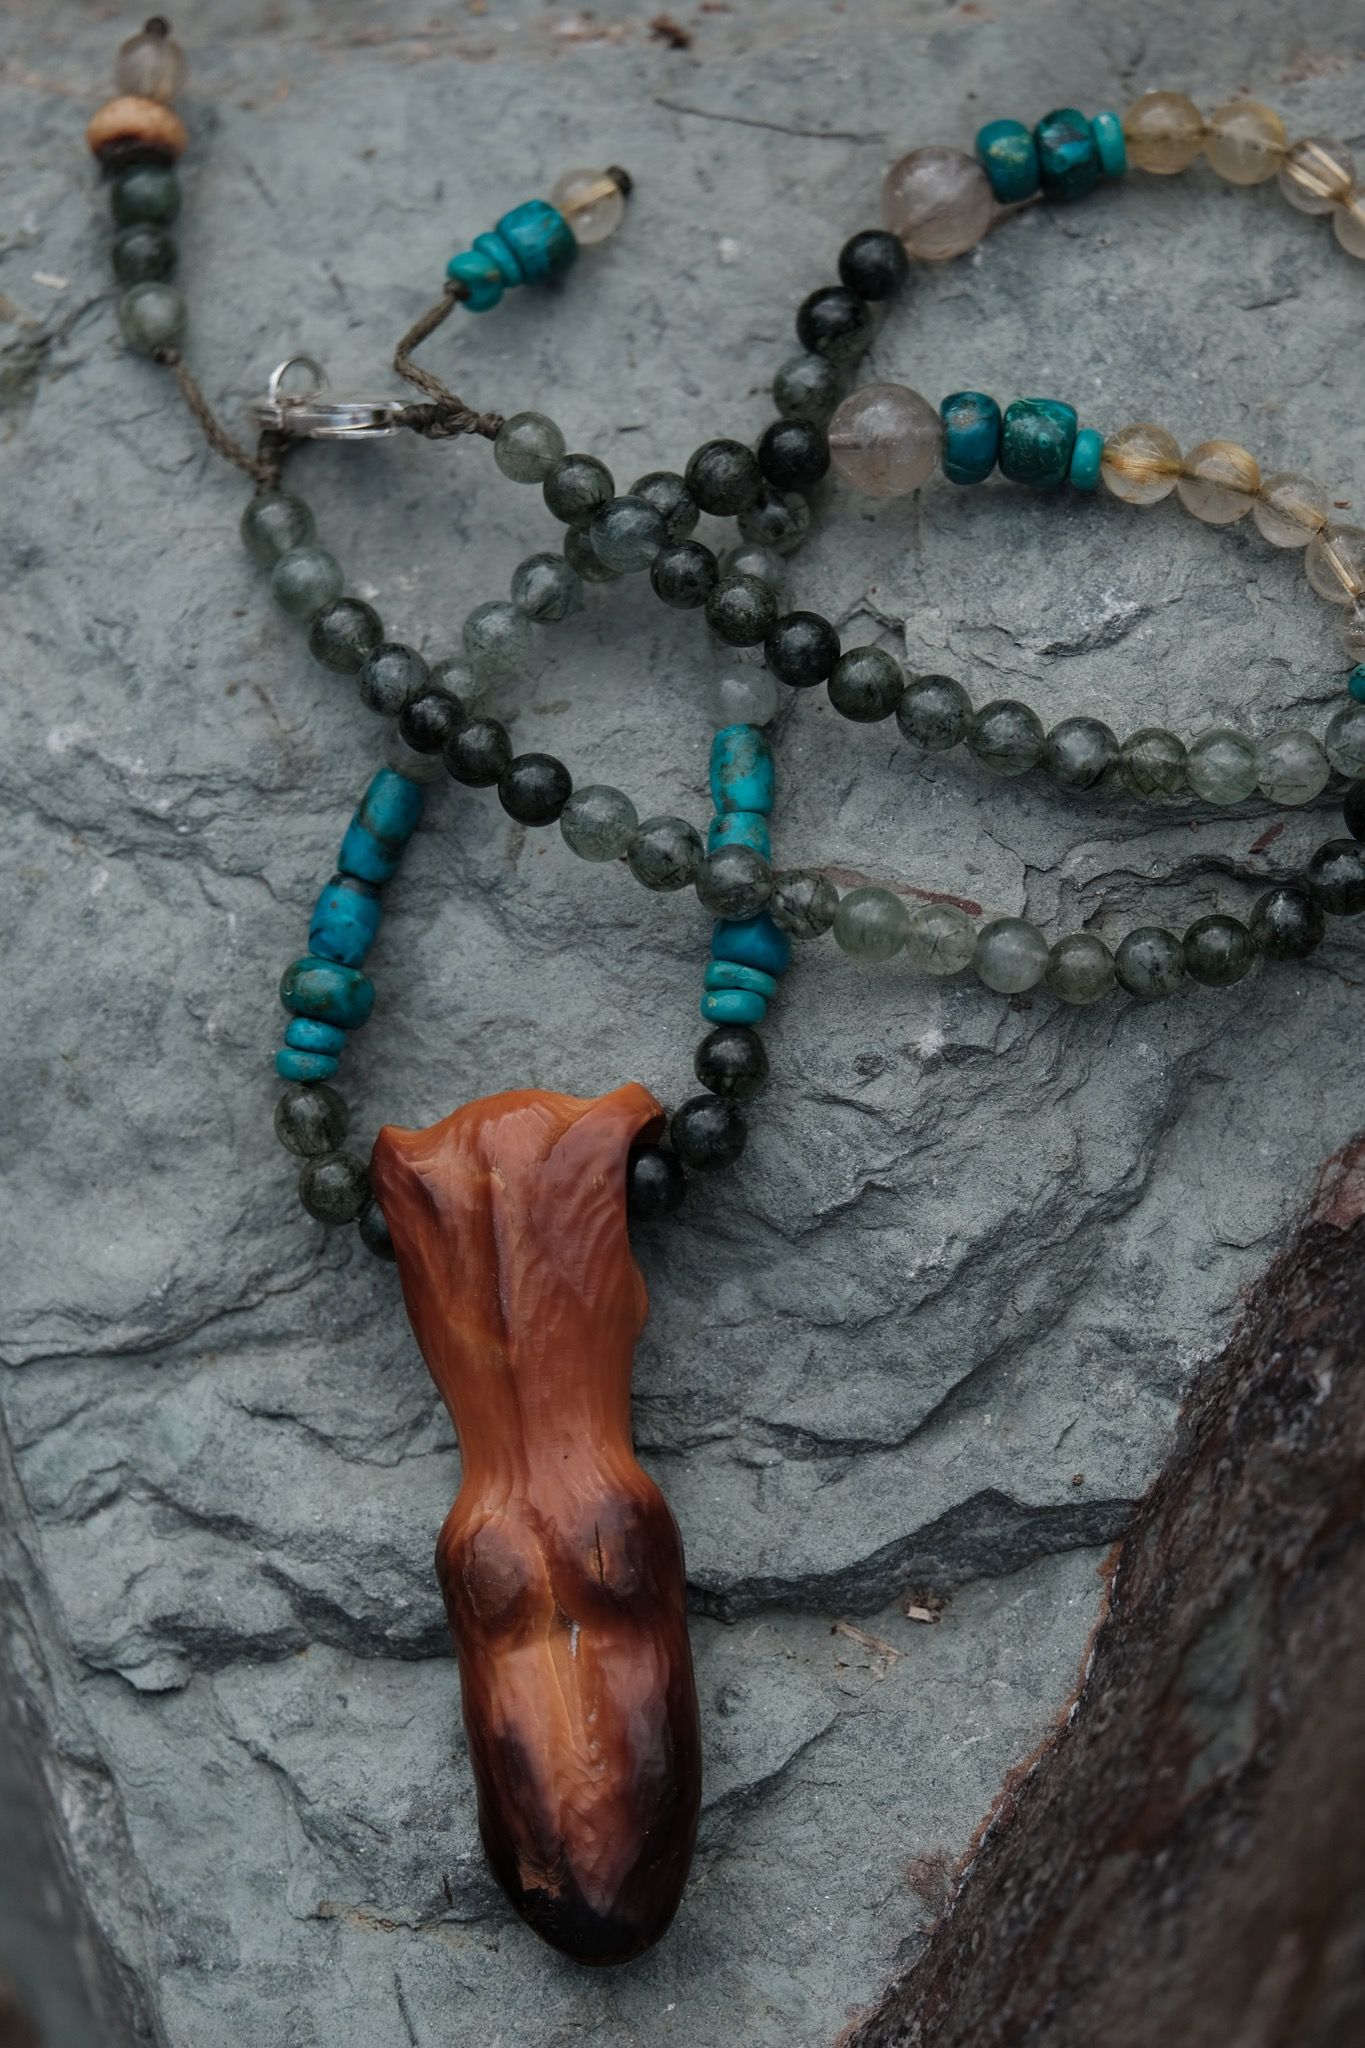 A necklace of green, blue, golden and Carmel ivory stones with a goddess figure at the center rests on a grey-blue stone